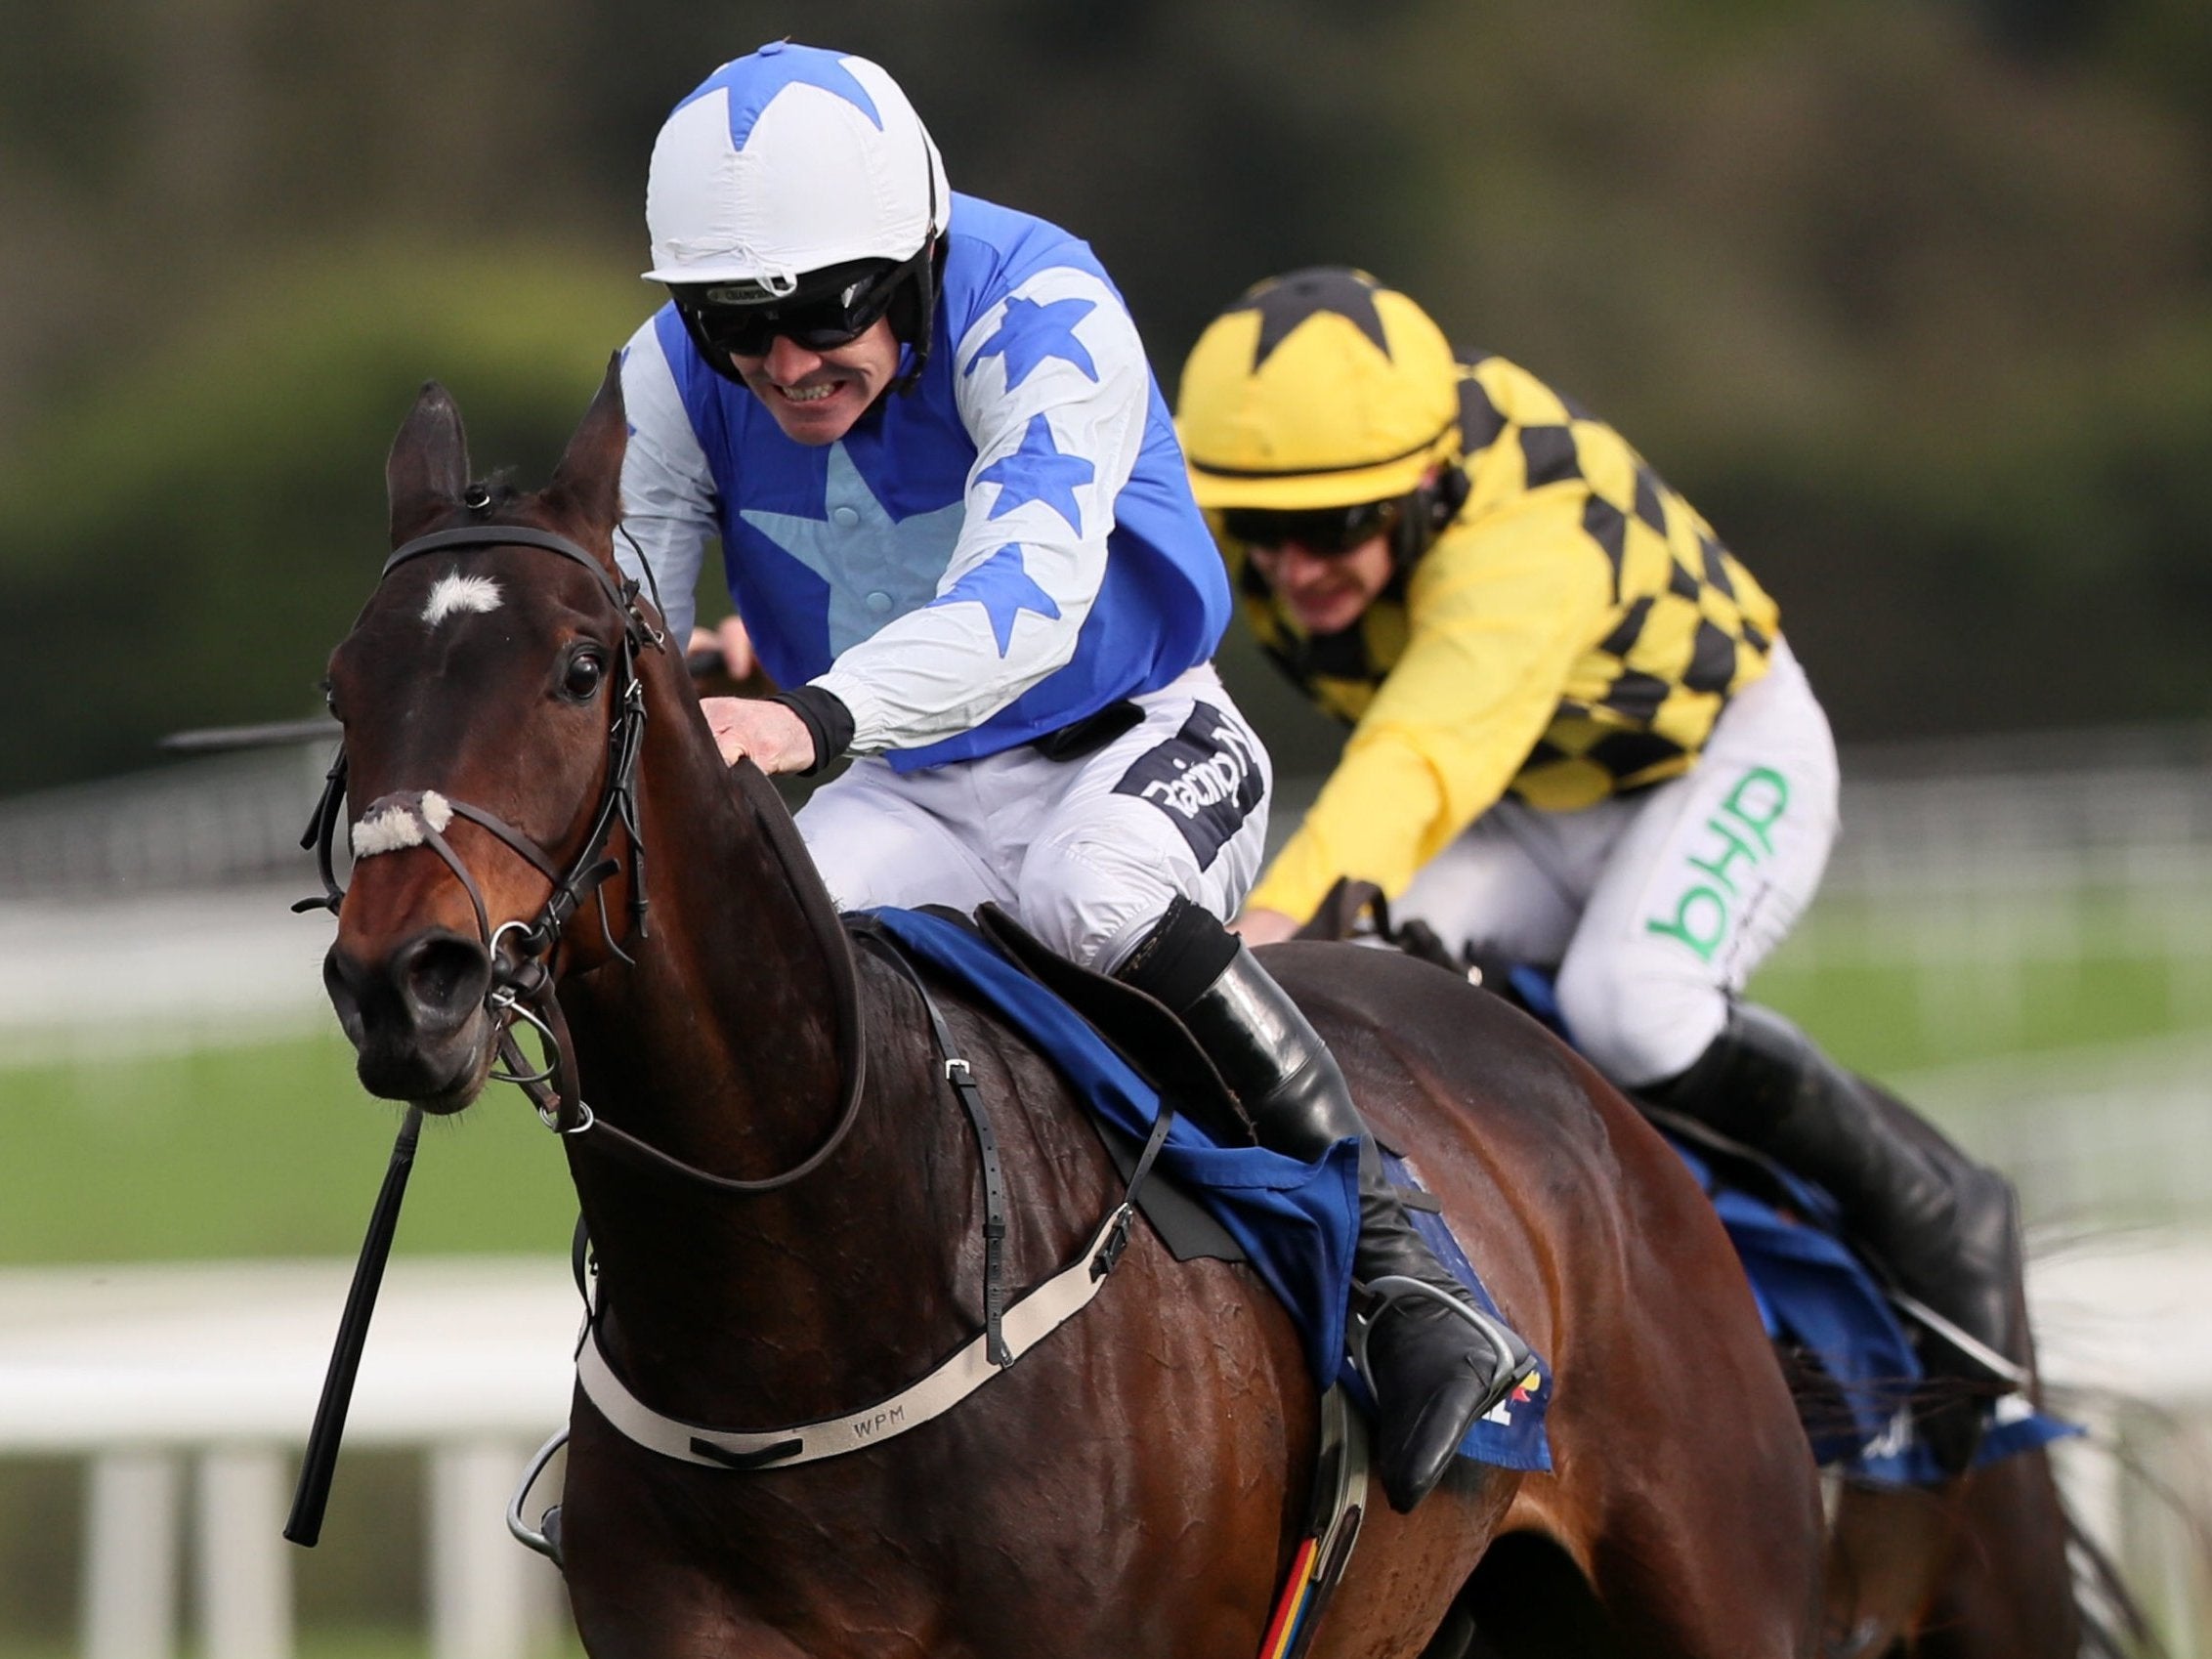 Walsh’s final winner came on Kemboy in the Punchestown Gold Cup